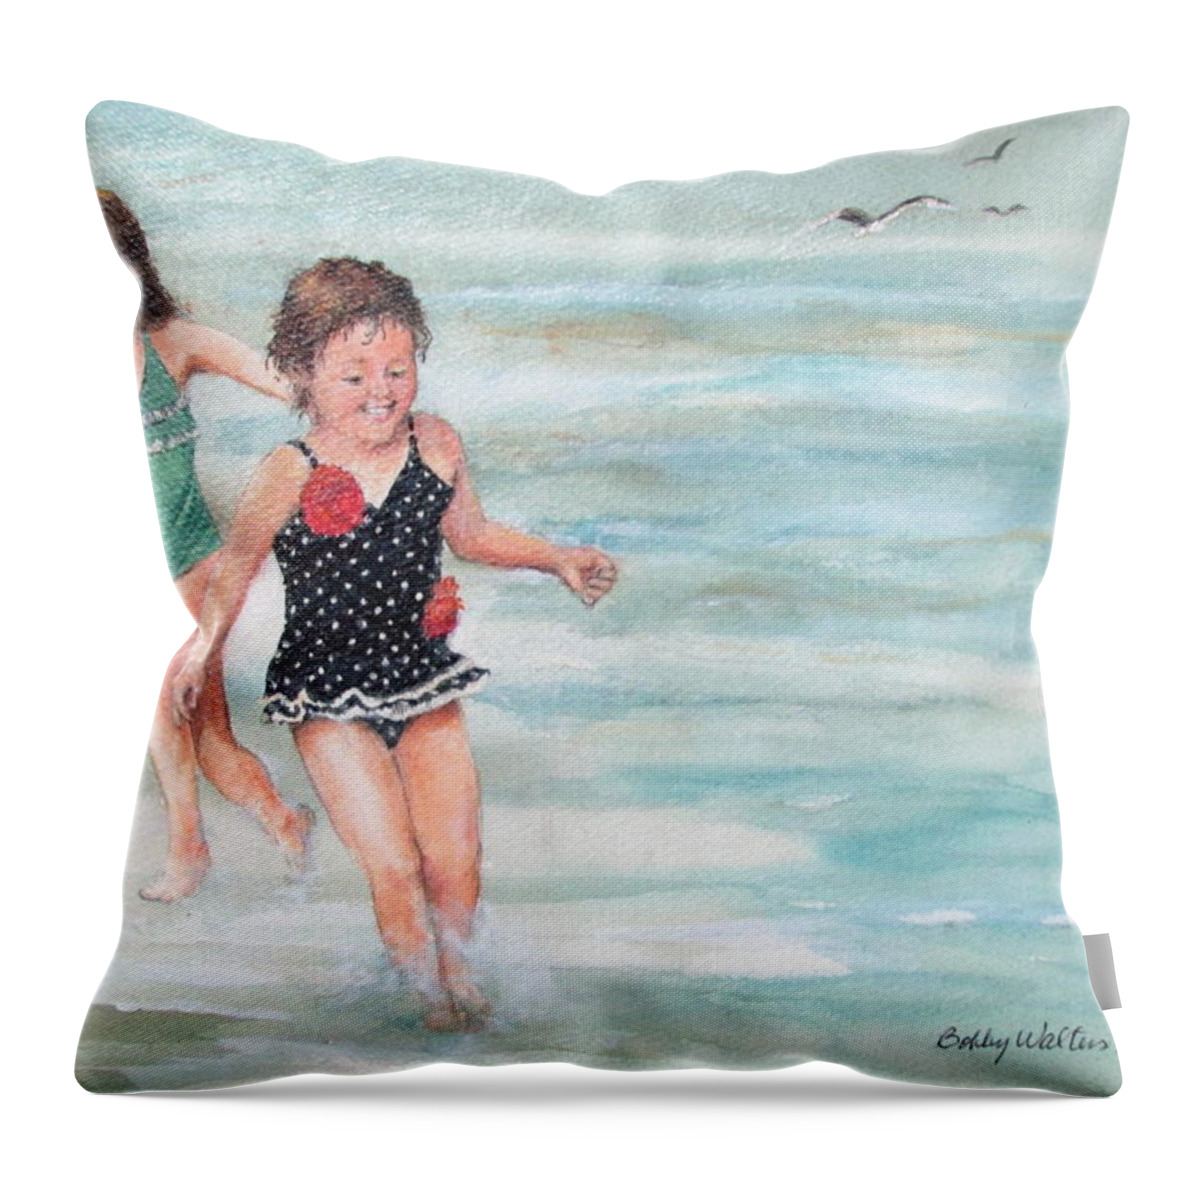  Throw Pillow featuring the painting Splash by Bobby Walters